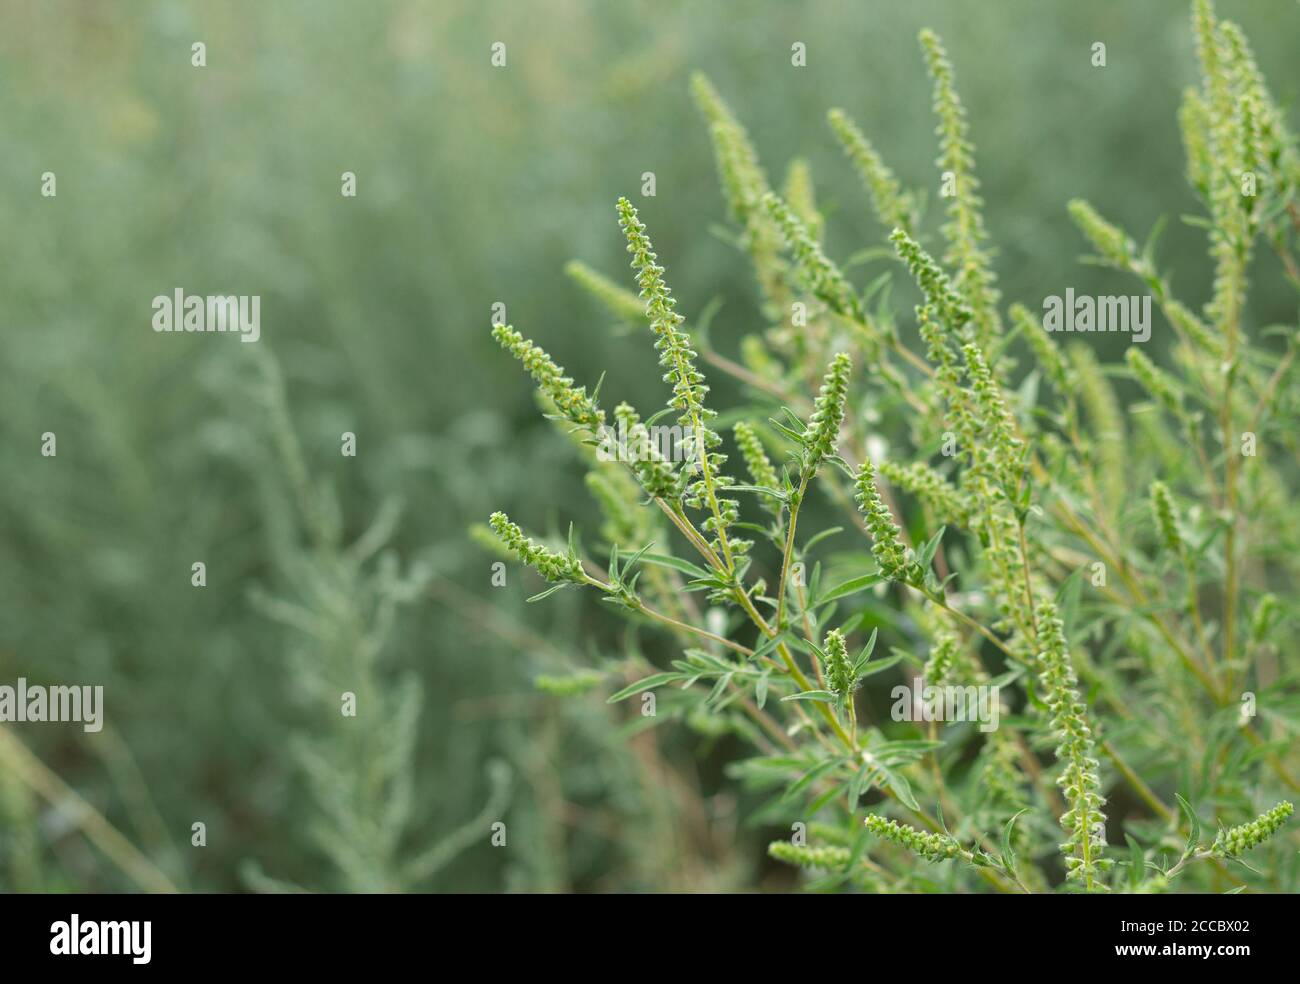 Ragweed or Ambrosia artemisiifolia blooming with pollen. Allergy in summer and autumn Stock Photo